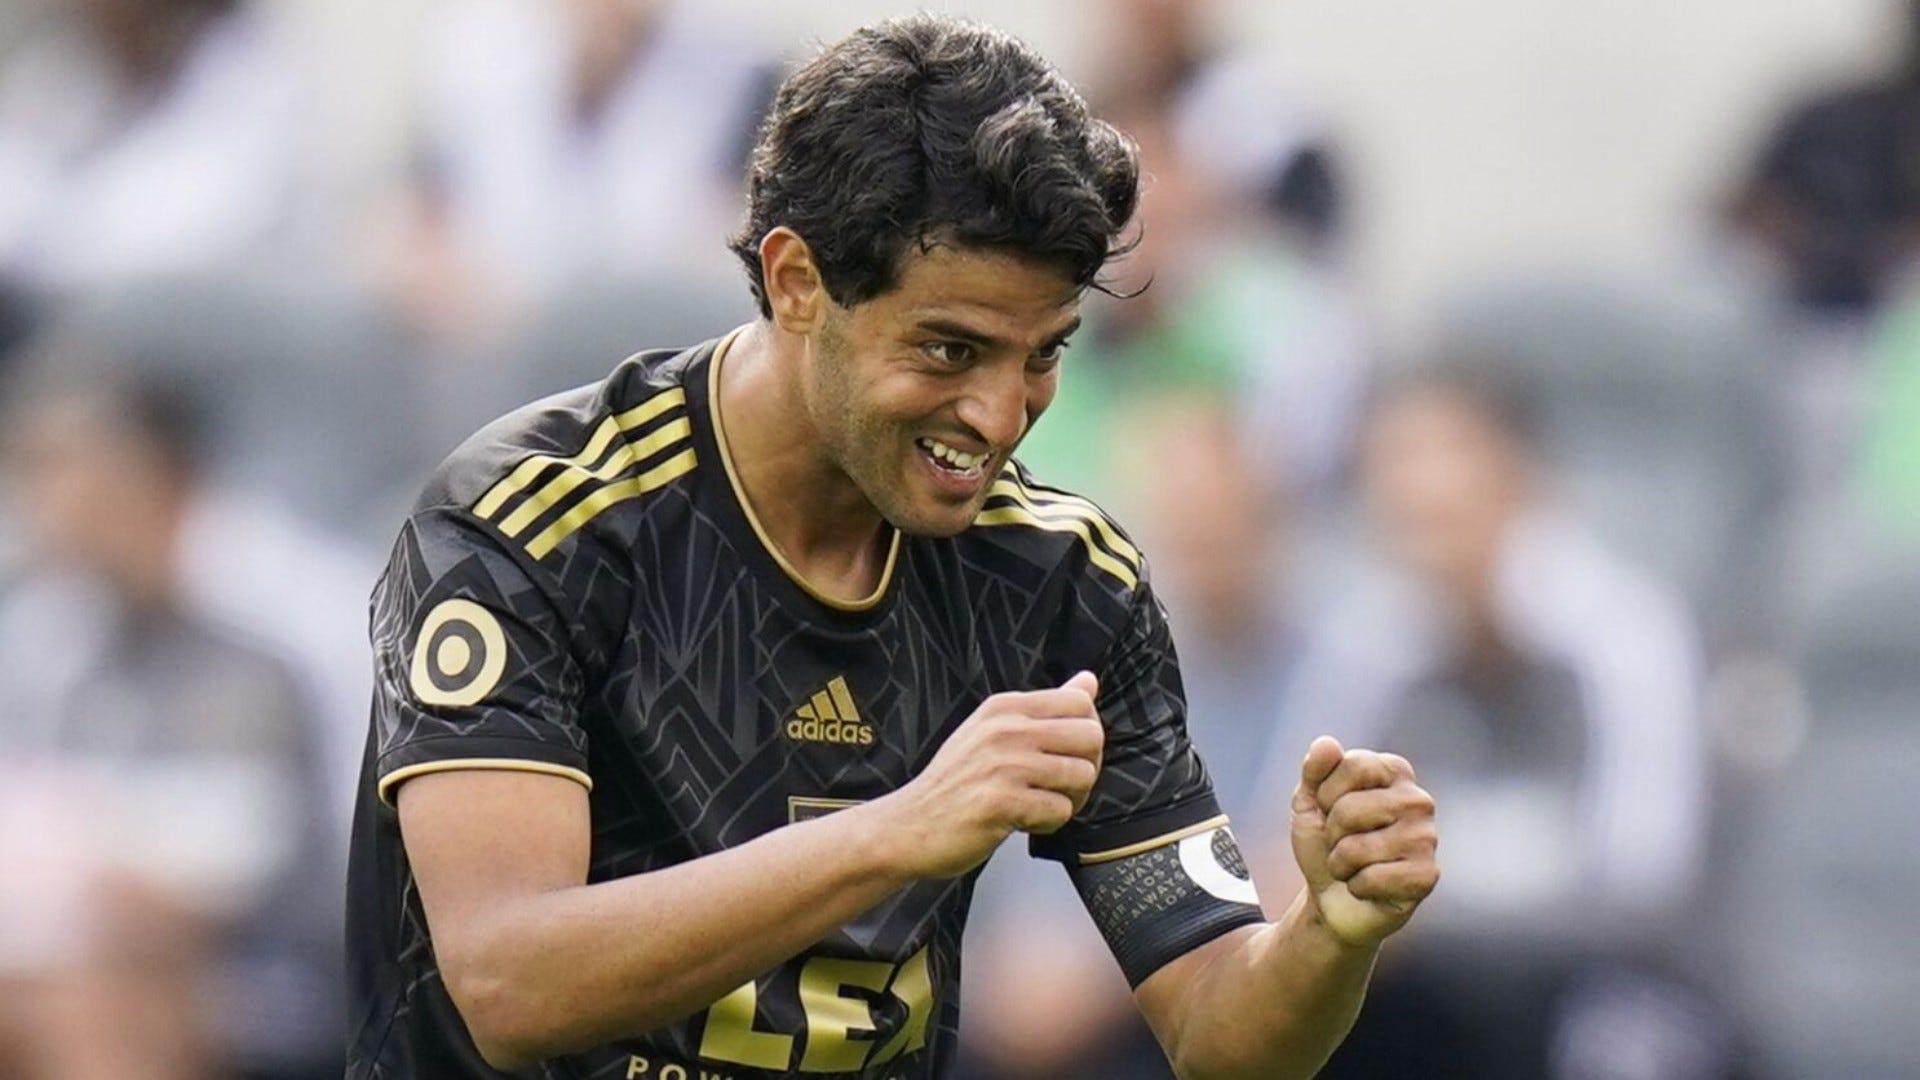 Hollywood ending! LAFC win legendary MLS Cup 2022 over Philadelphia Union